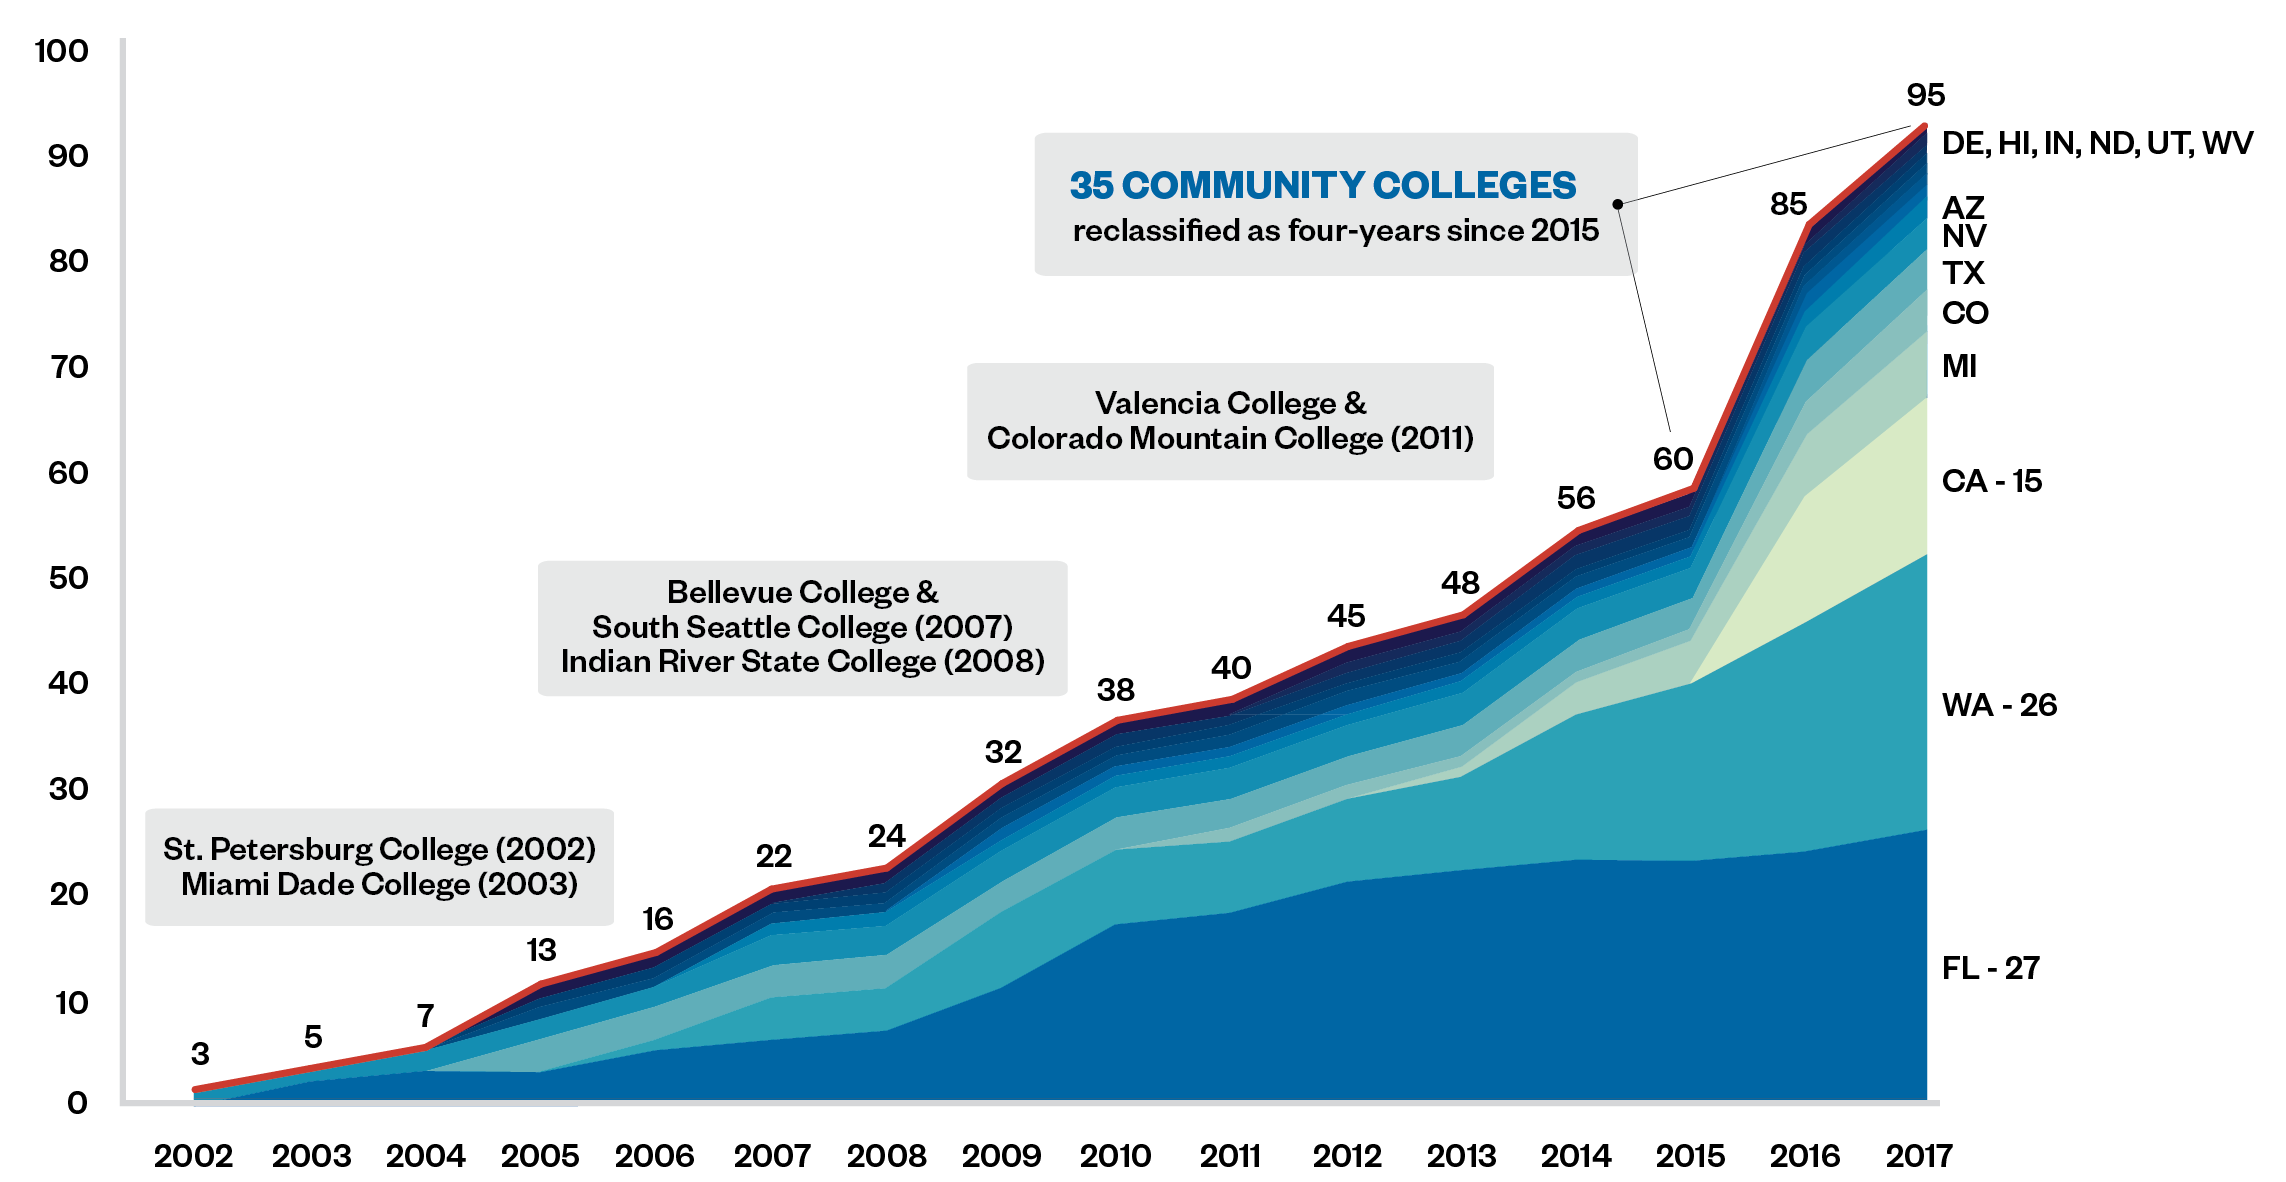 The number of community colleges over time 